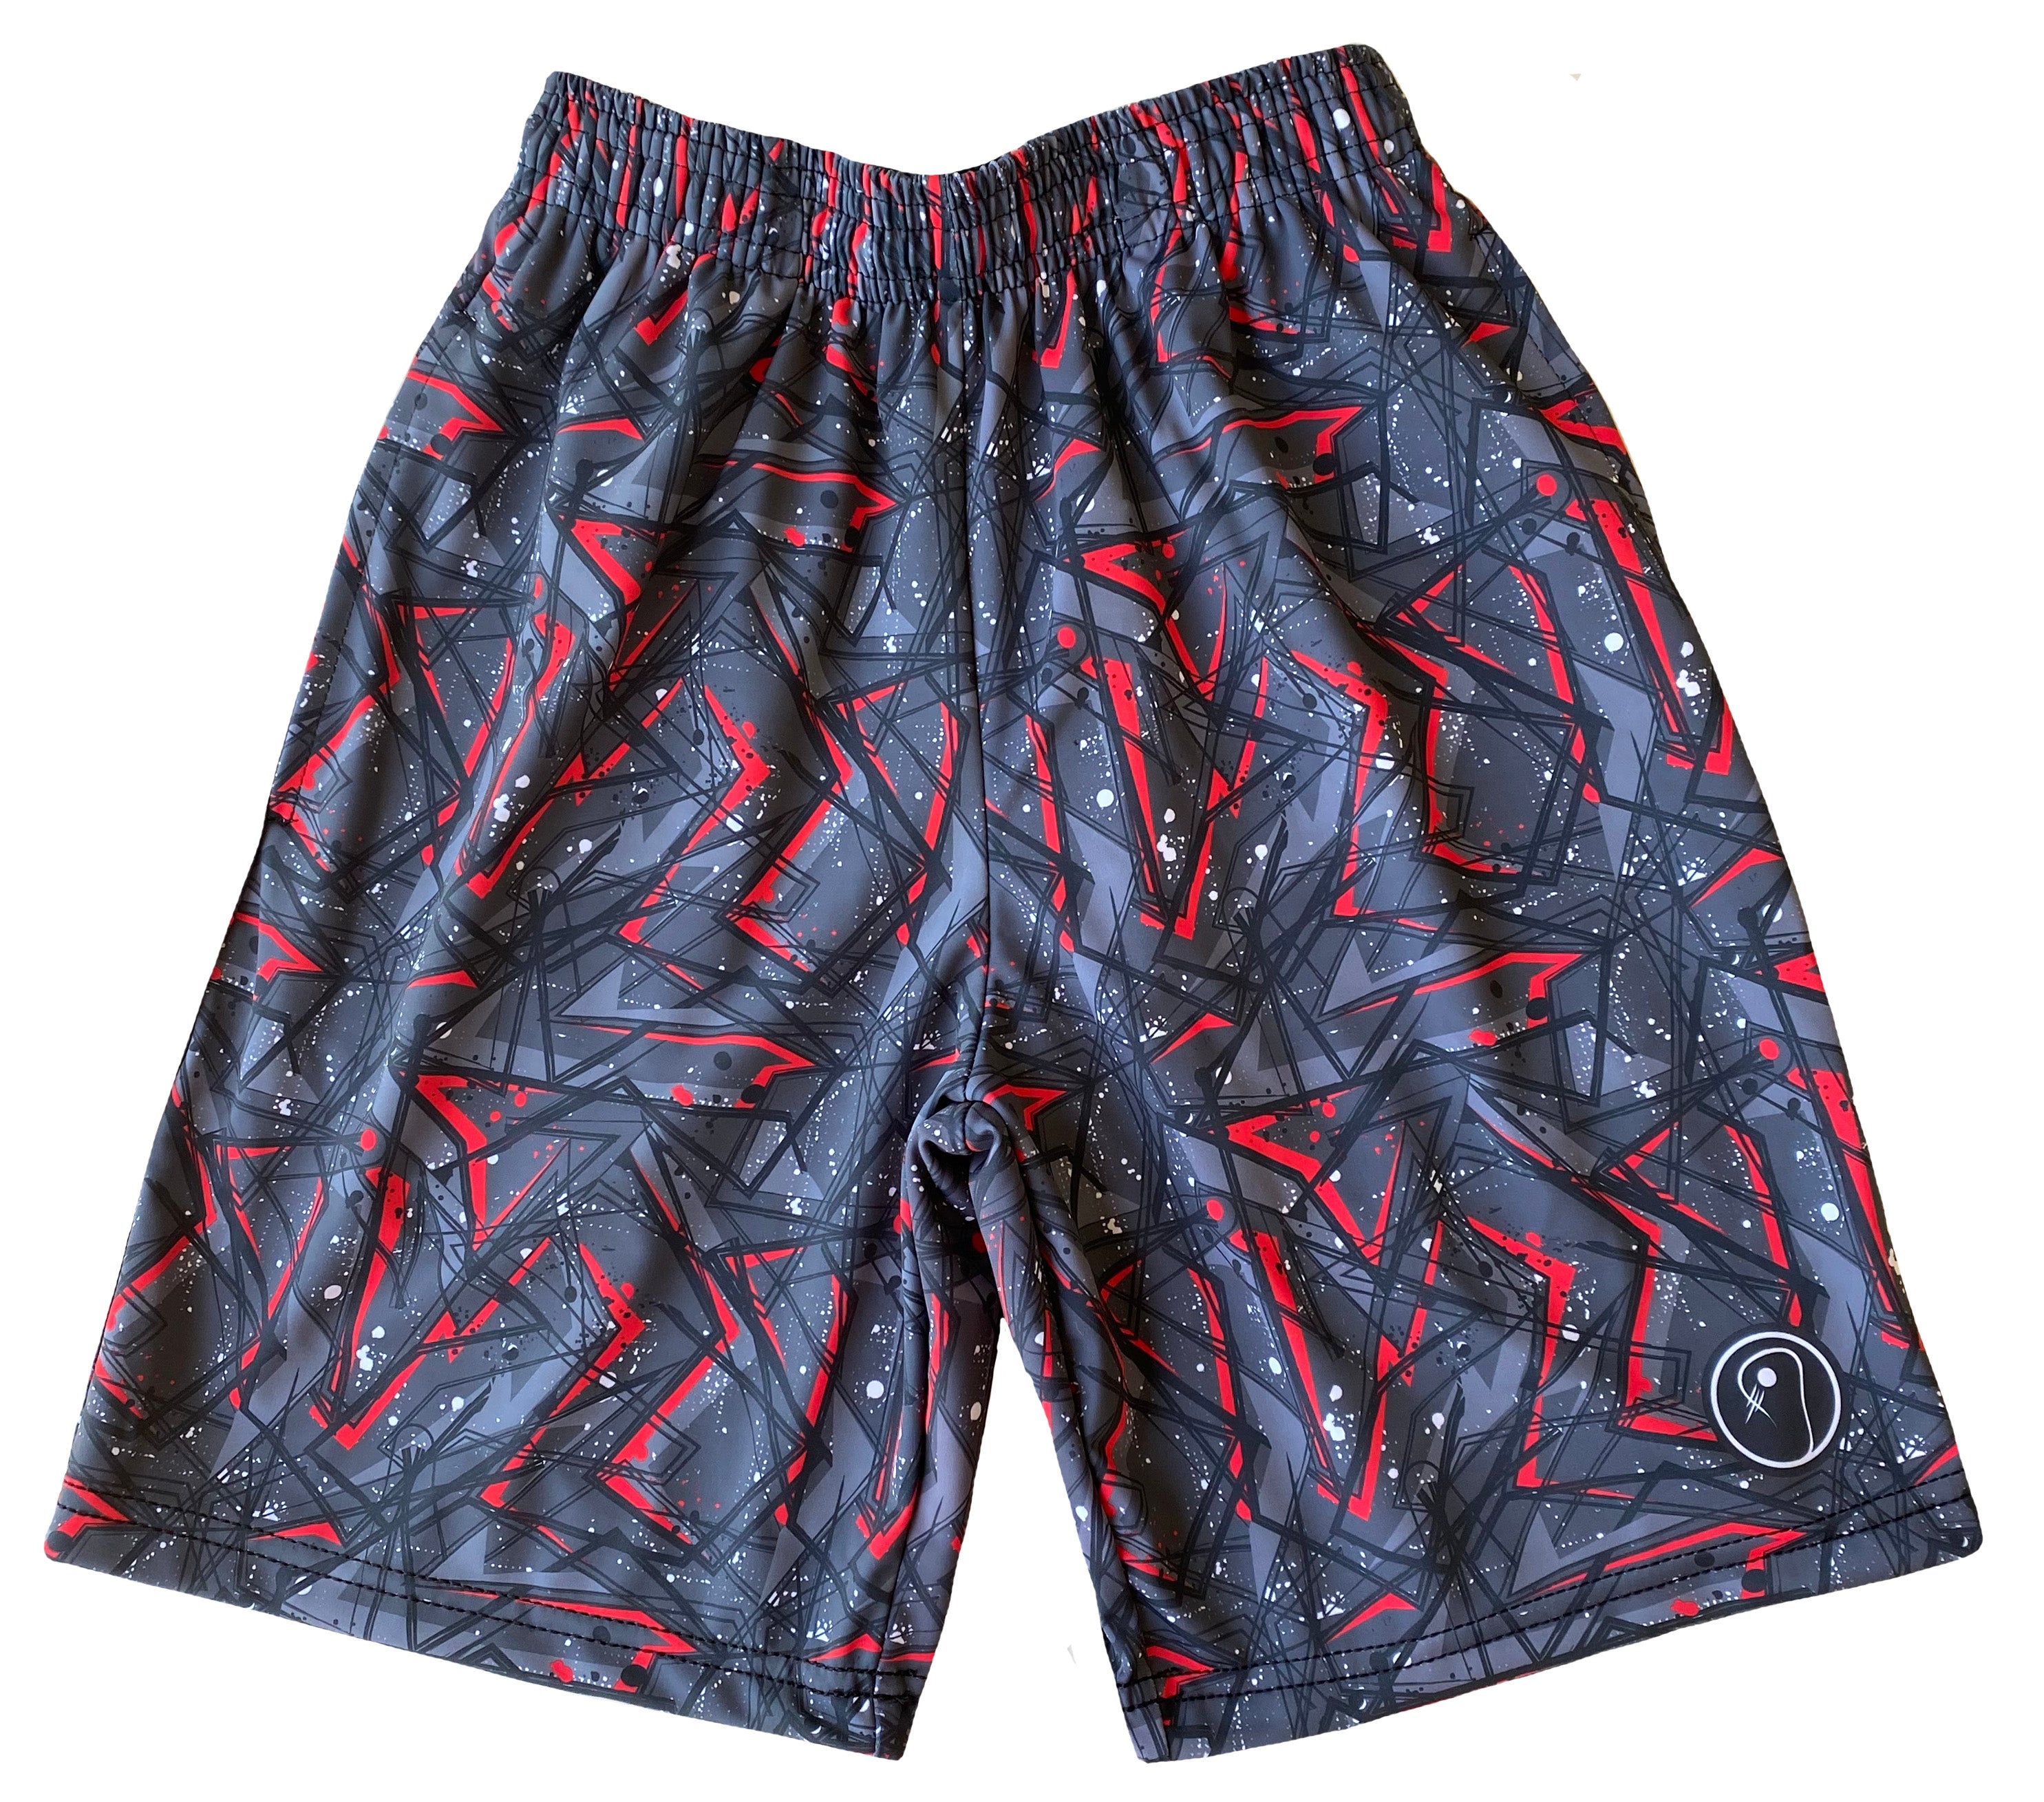 Boys Graphic Lacrosse Shorts - Black Red